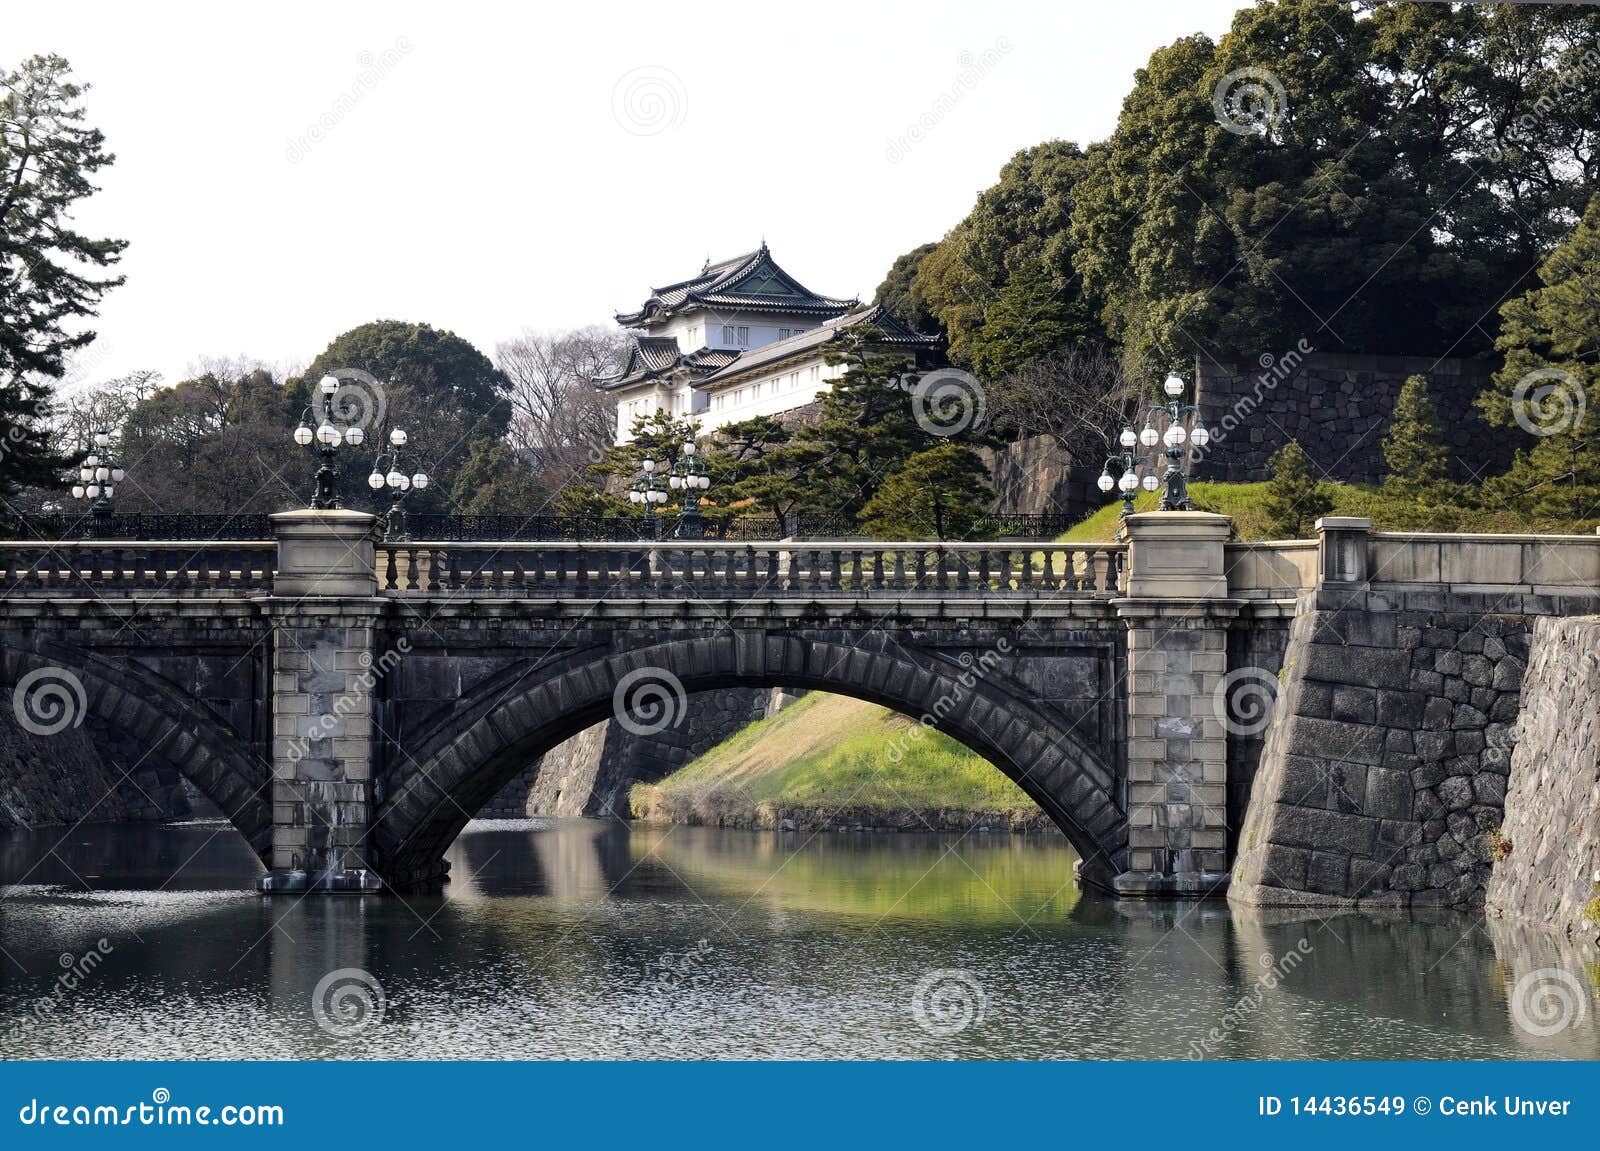 imperial palace - tokyo